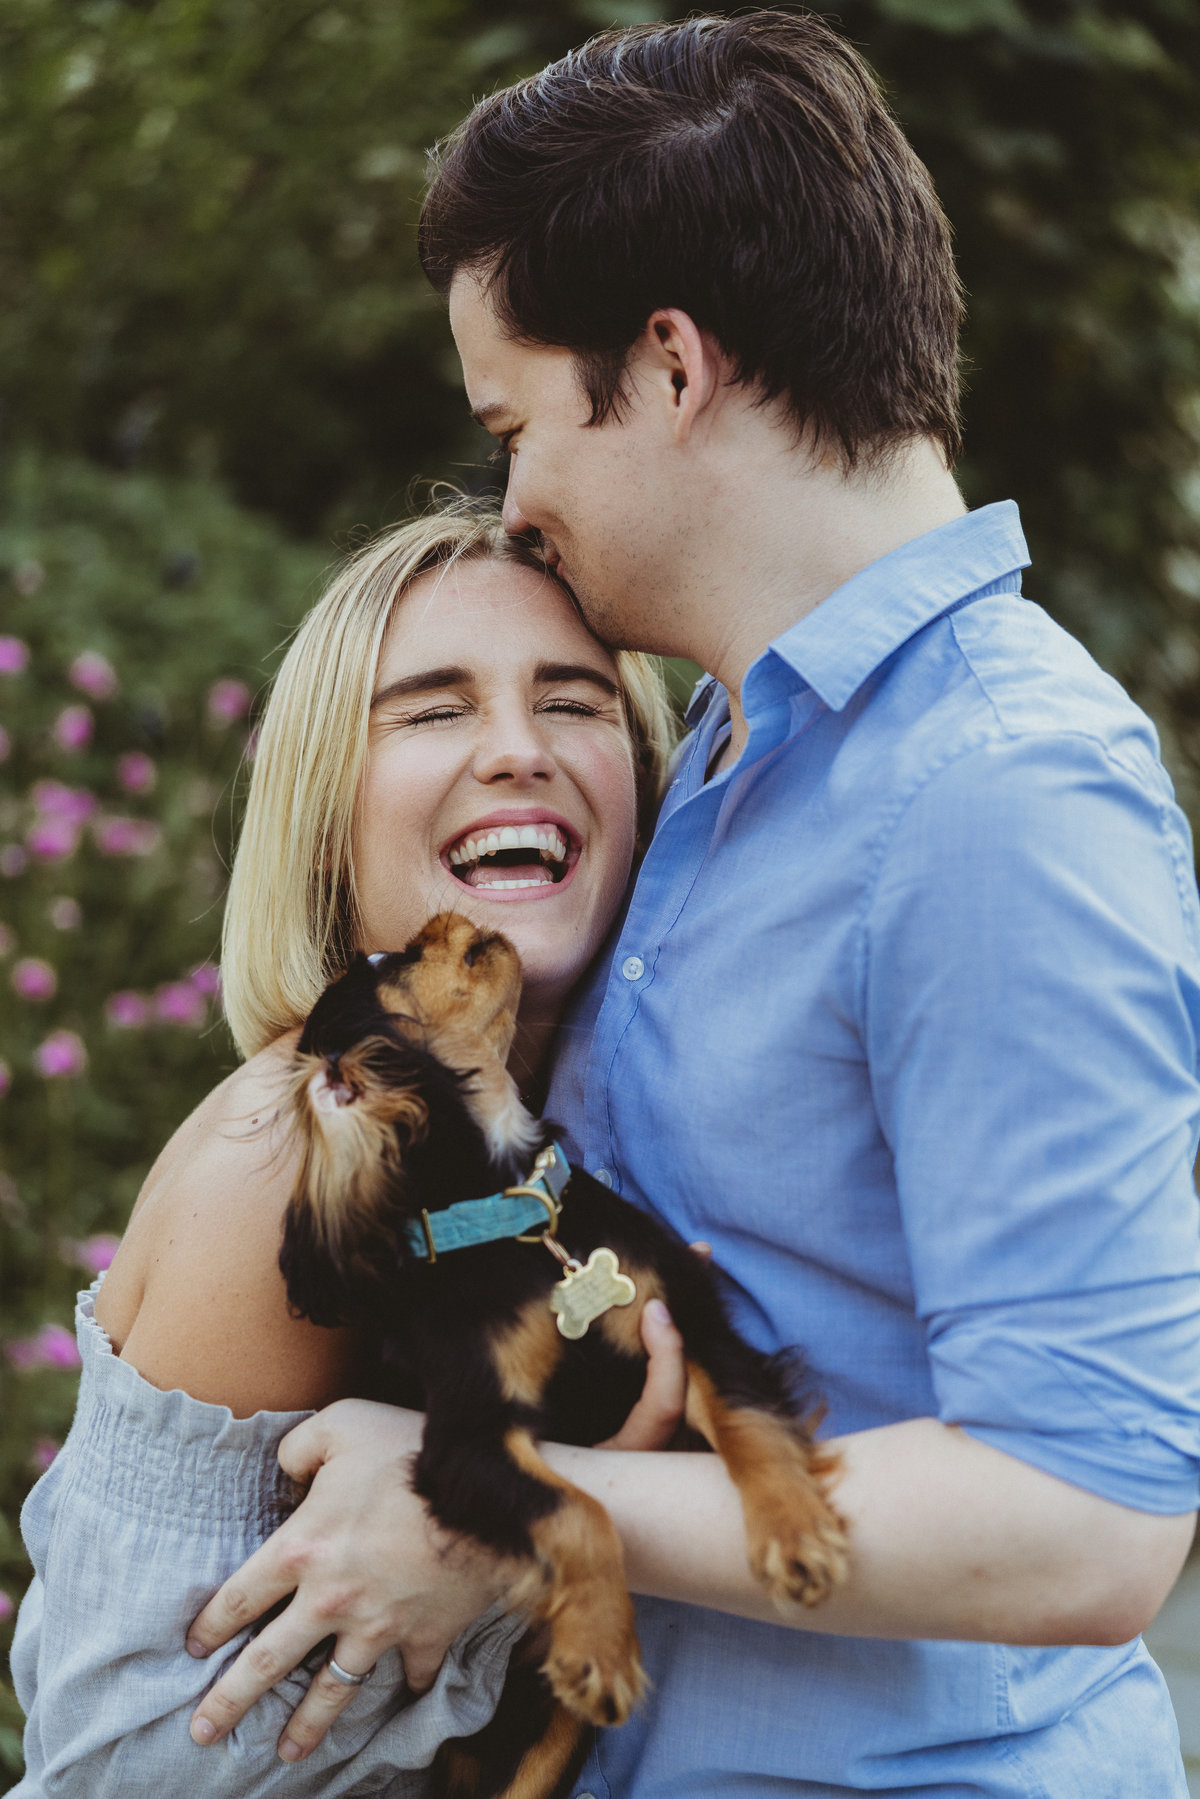 SMILING COUPLE WITH PUPPY ENGAGEMENT PHOTOGRAPHY SESSION